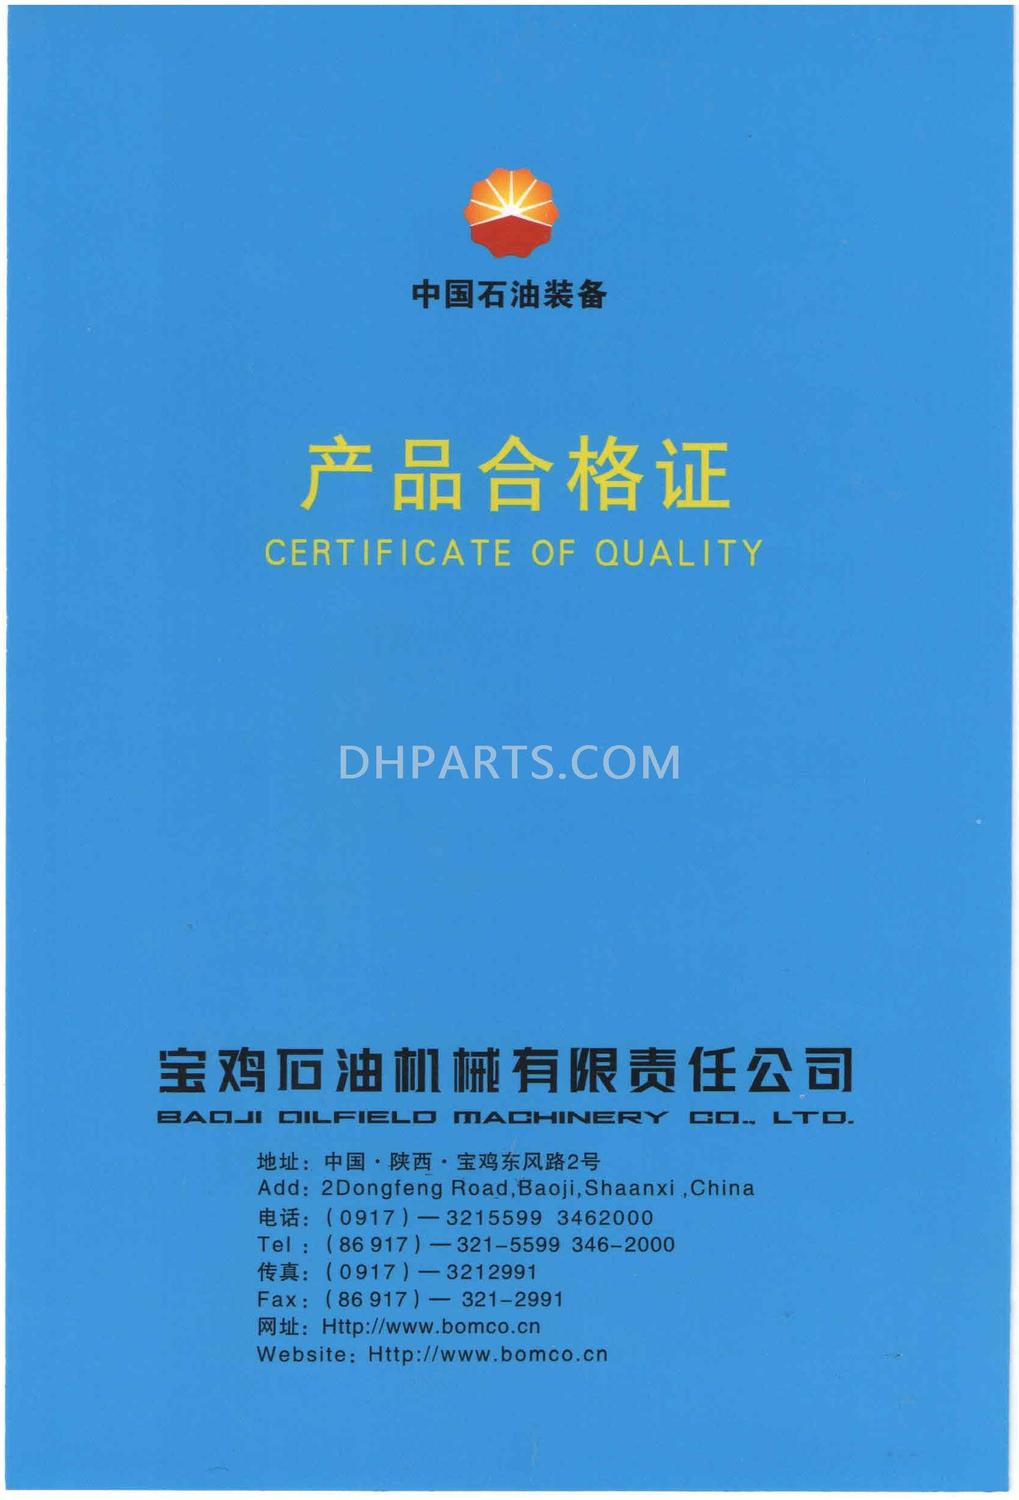 bomco certificate of quality